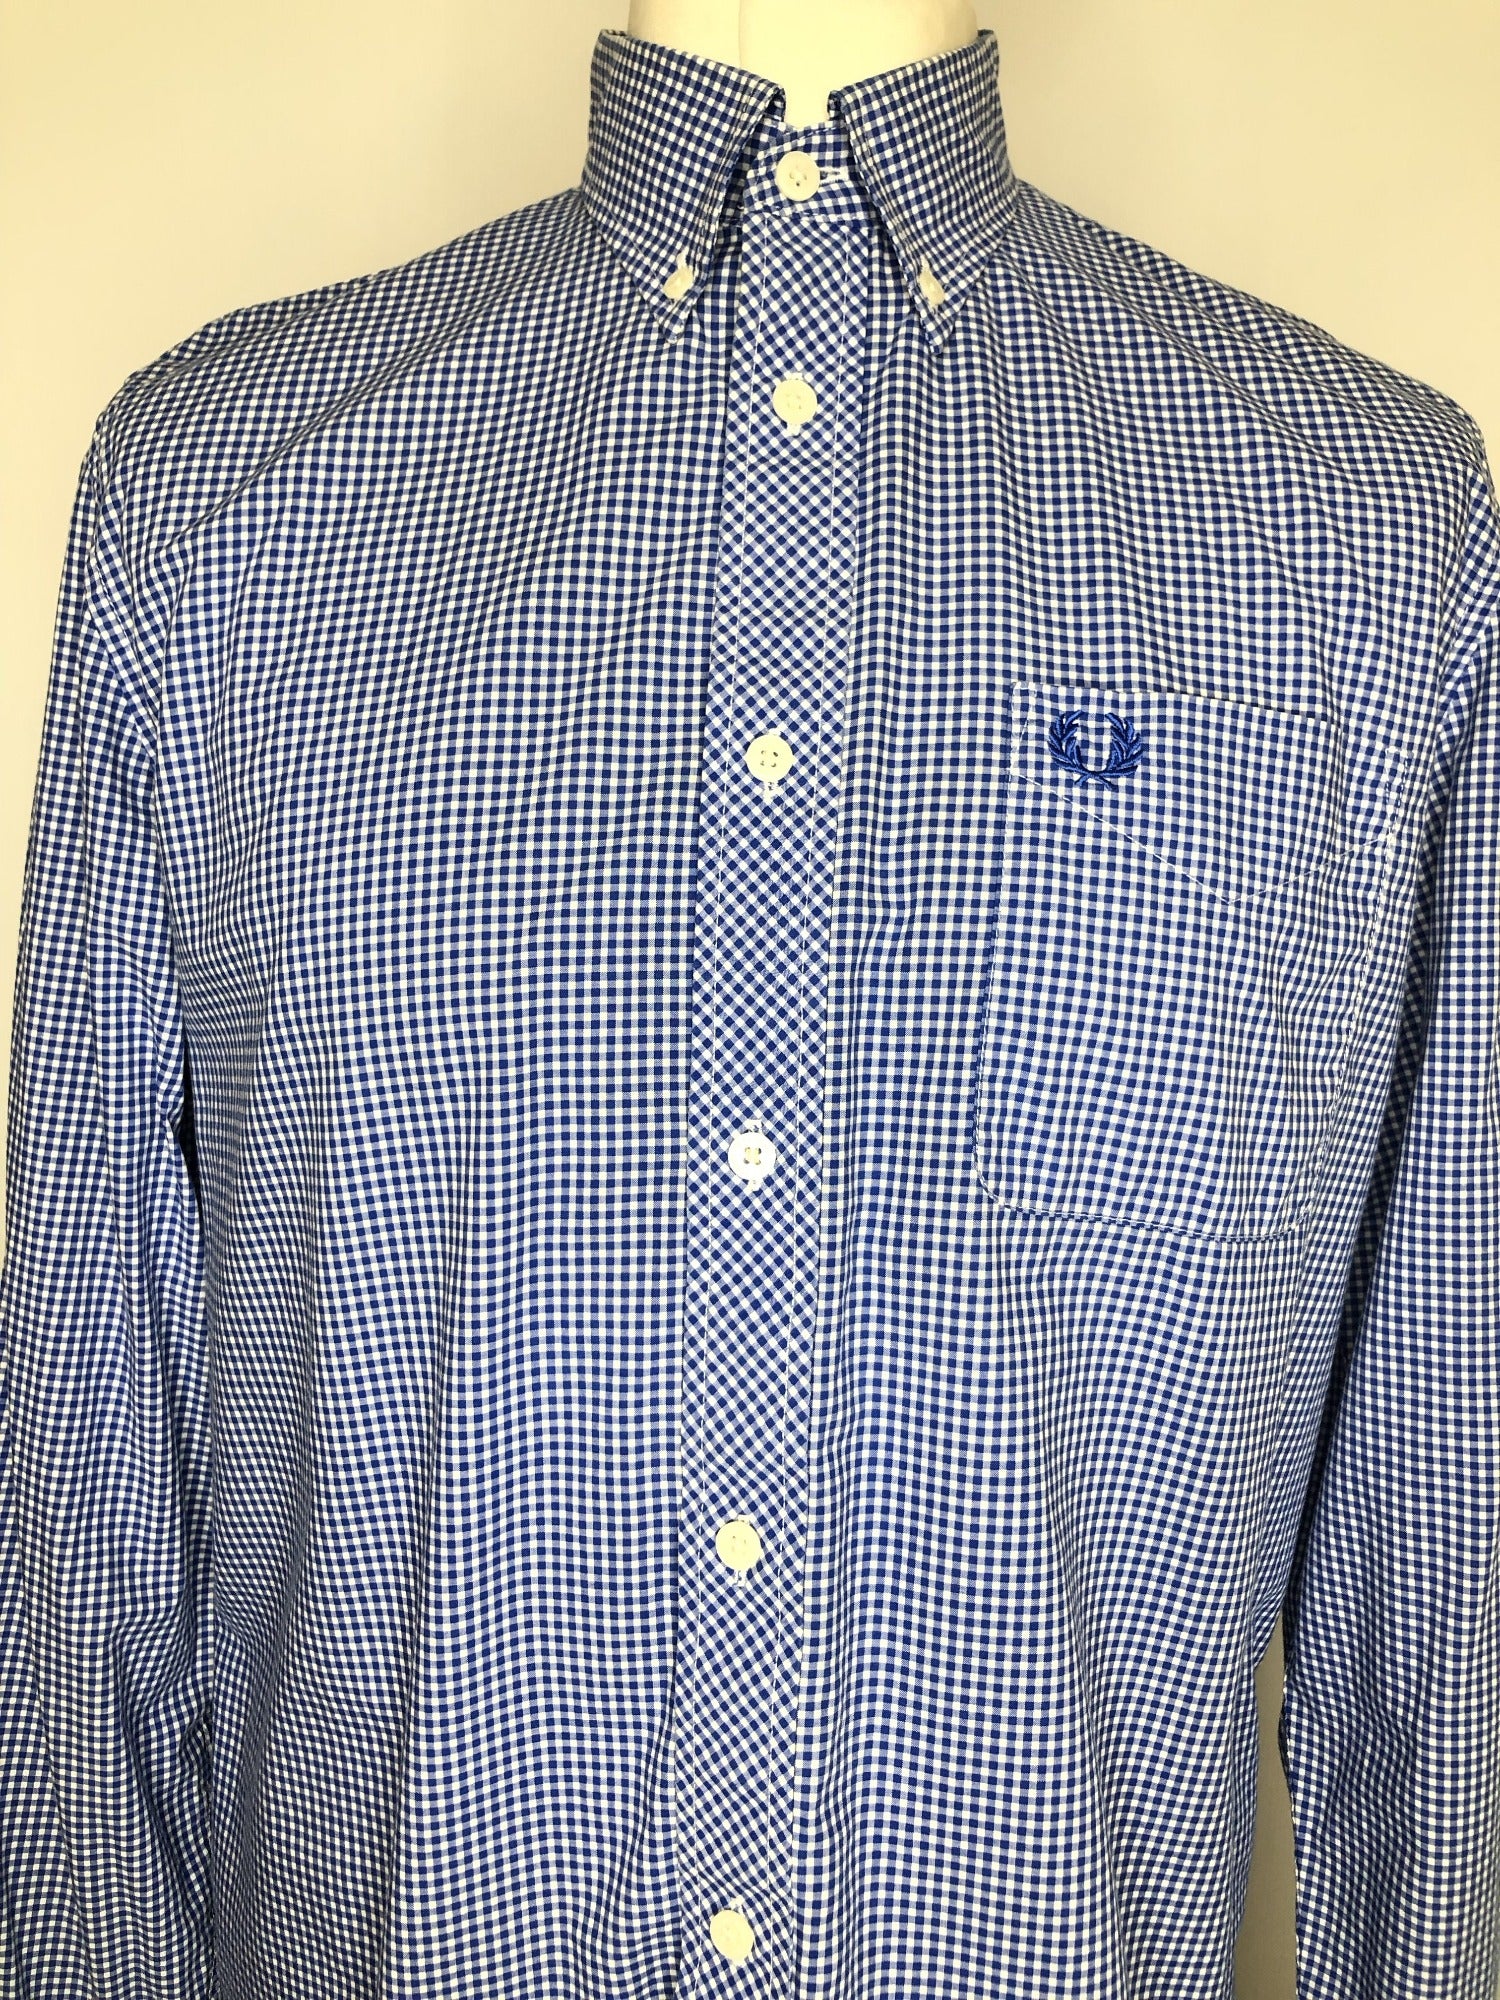 vintage  Urban Village Vintage  Shirt  retro  MOD  mens  long sleeves  Long sleeved top  long sleeve  L  gingham print  gingham check  Gingham  Fred Perry  fred  embroidered logo  Embroidered  collar  button down collar  button down  blue